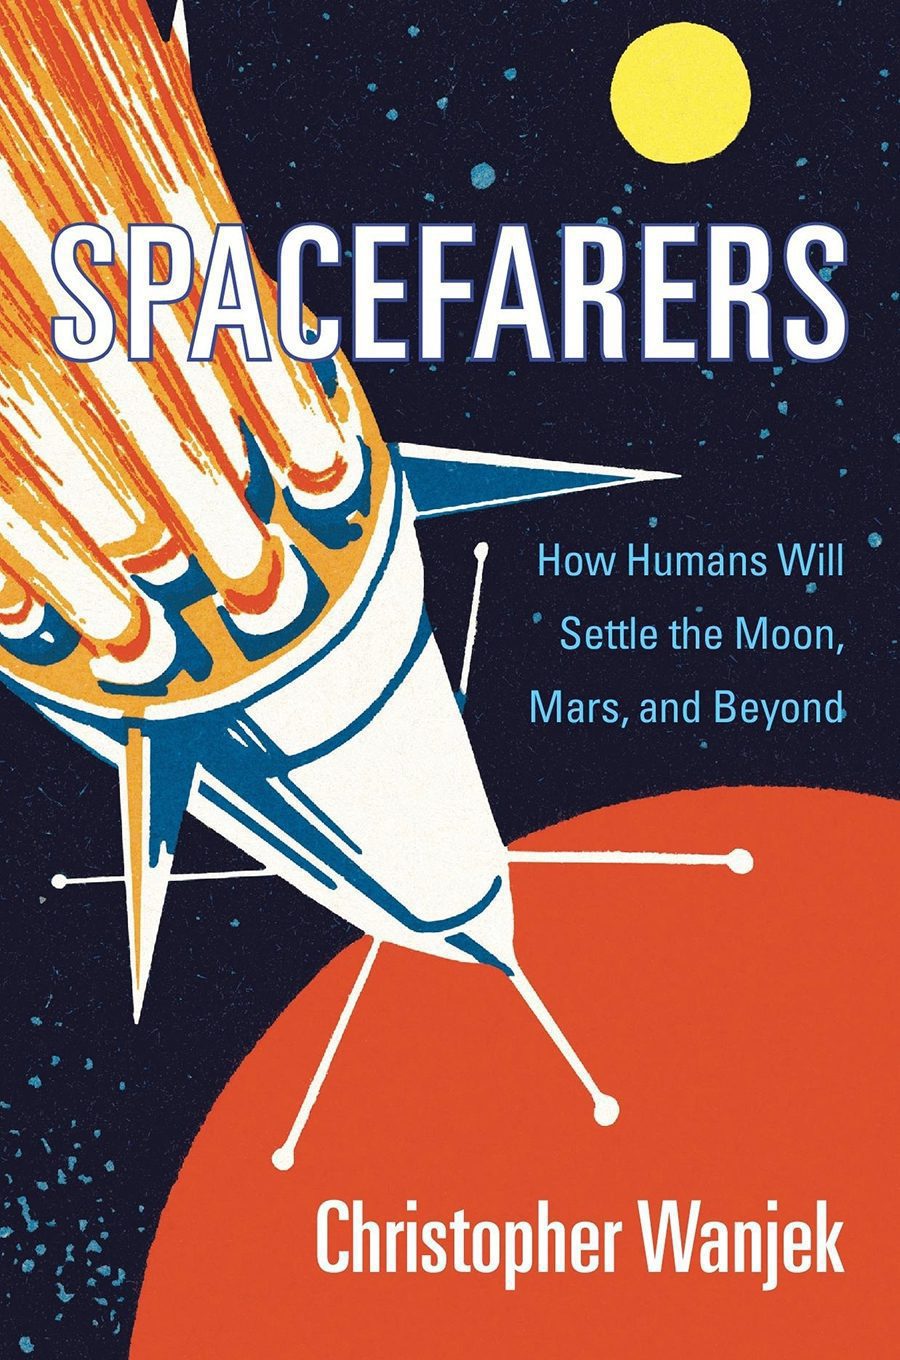 Spacefarers: How Humans Will Settle the Moon, Mars, and Beyond